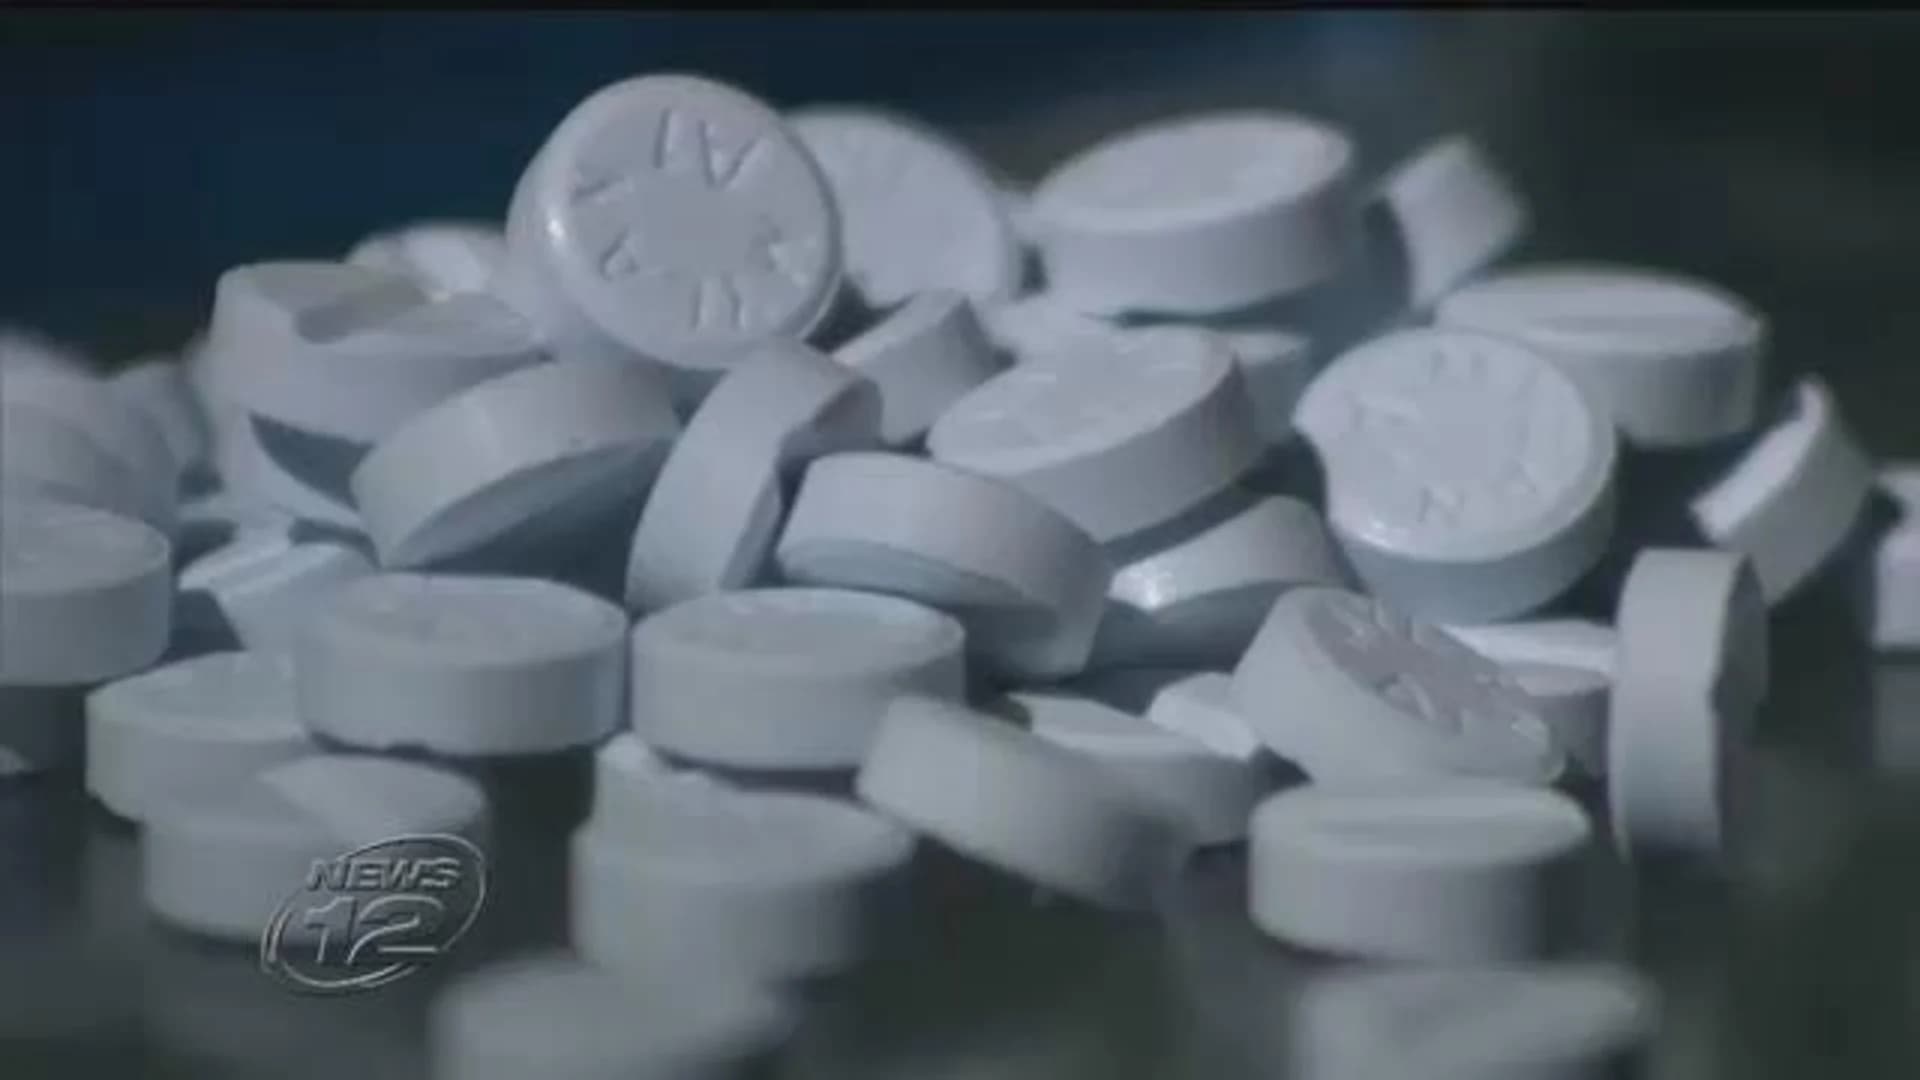 Drug rehab centers full as overdose deaths on the rise in NJ